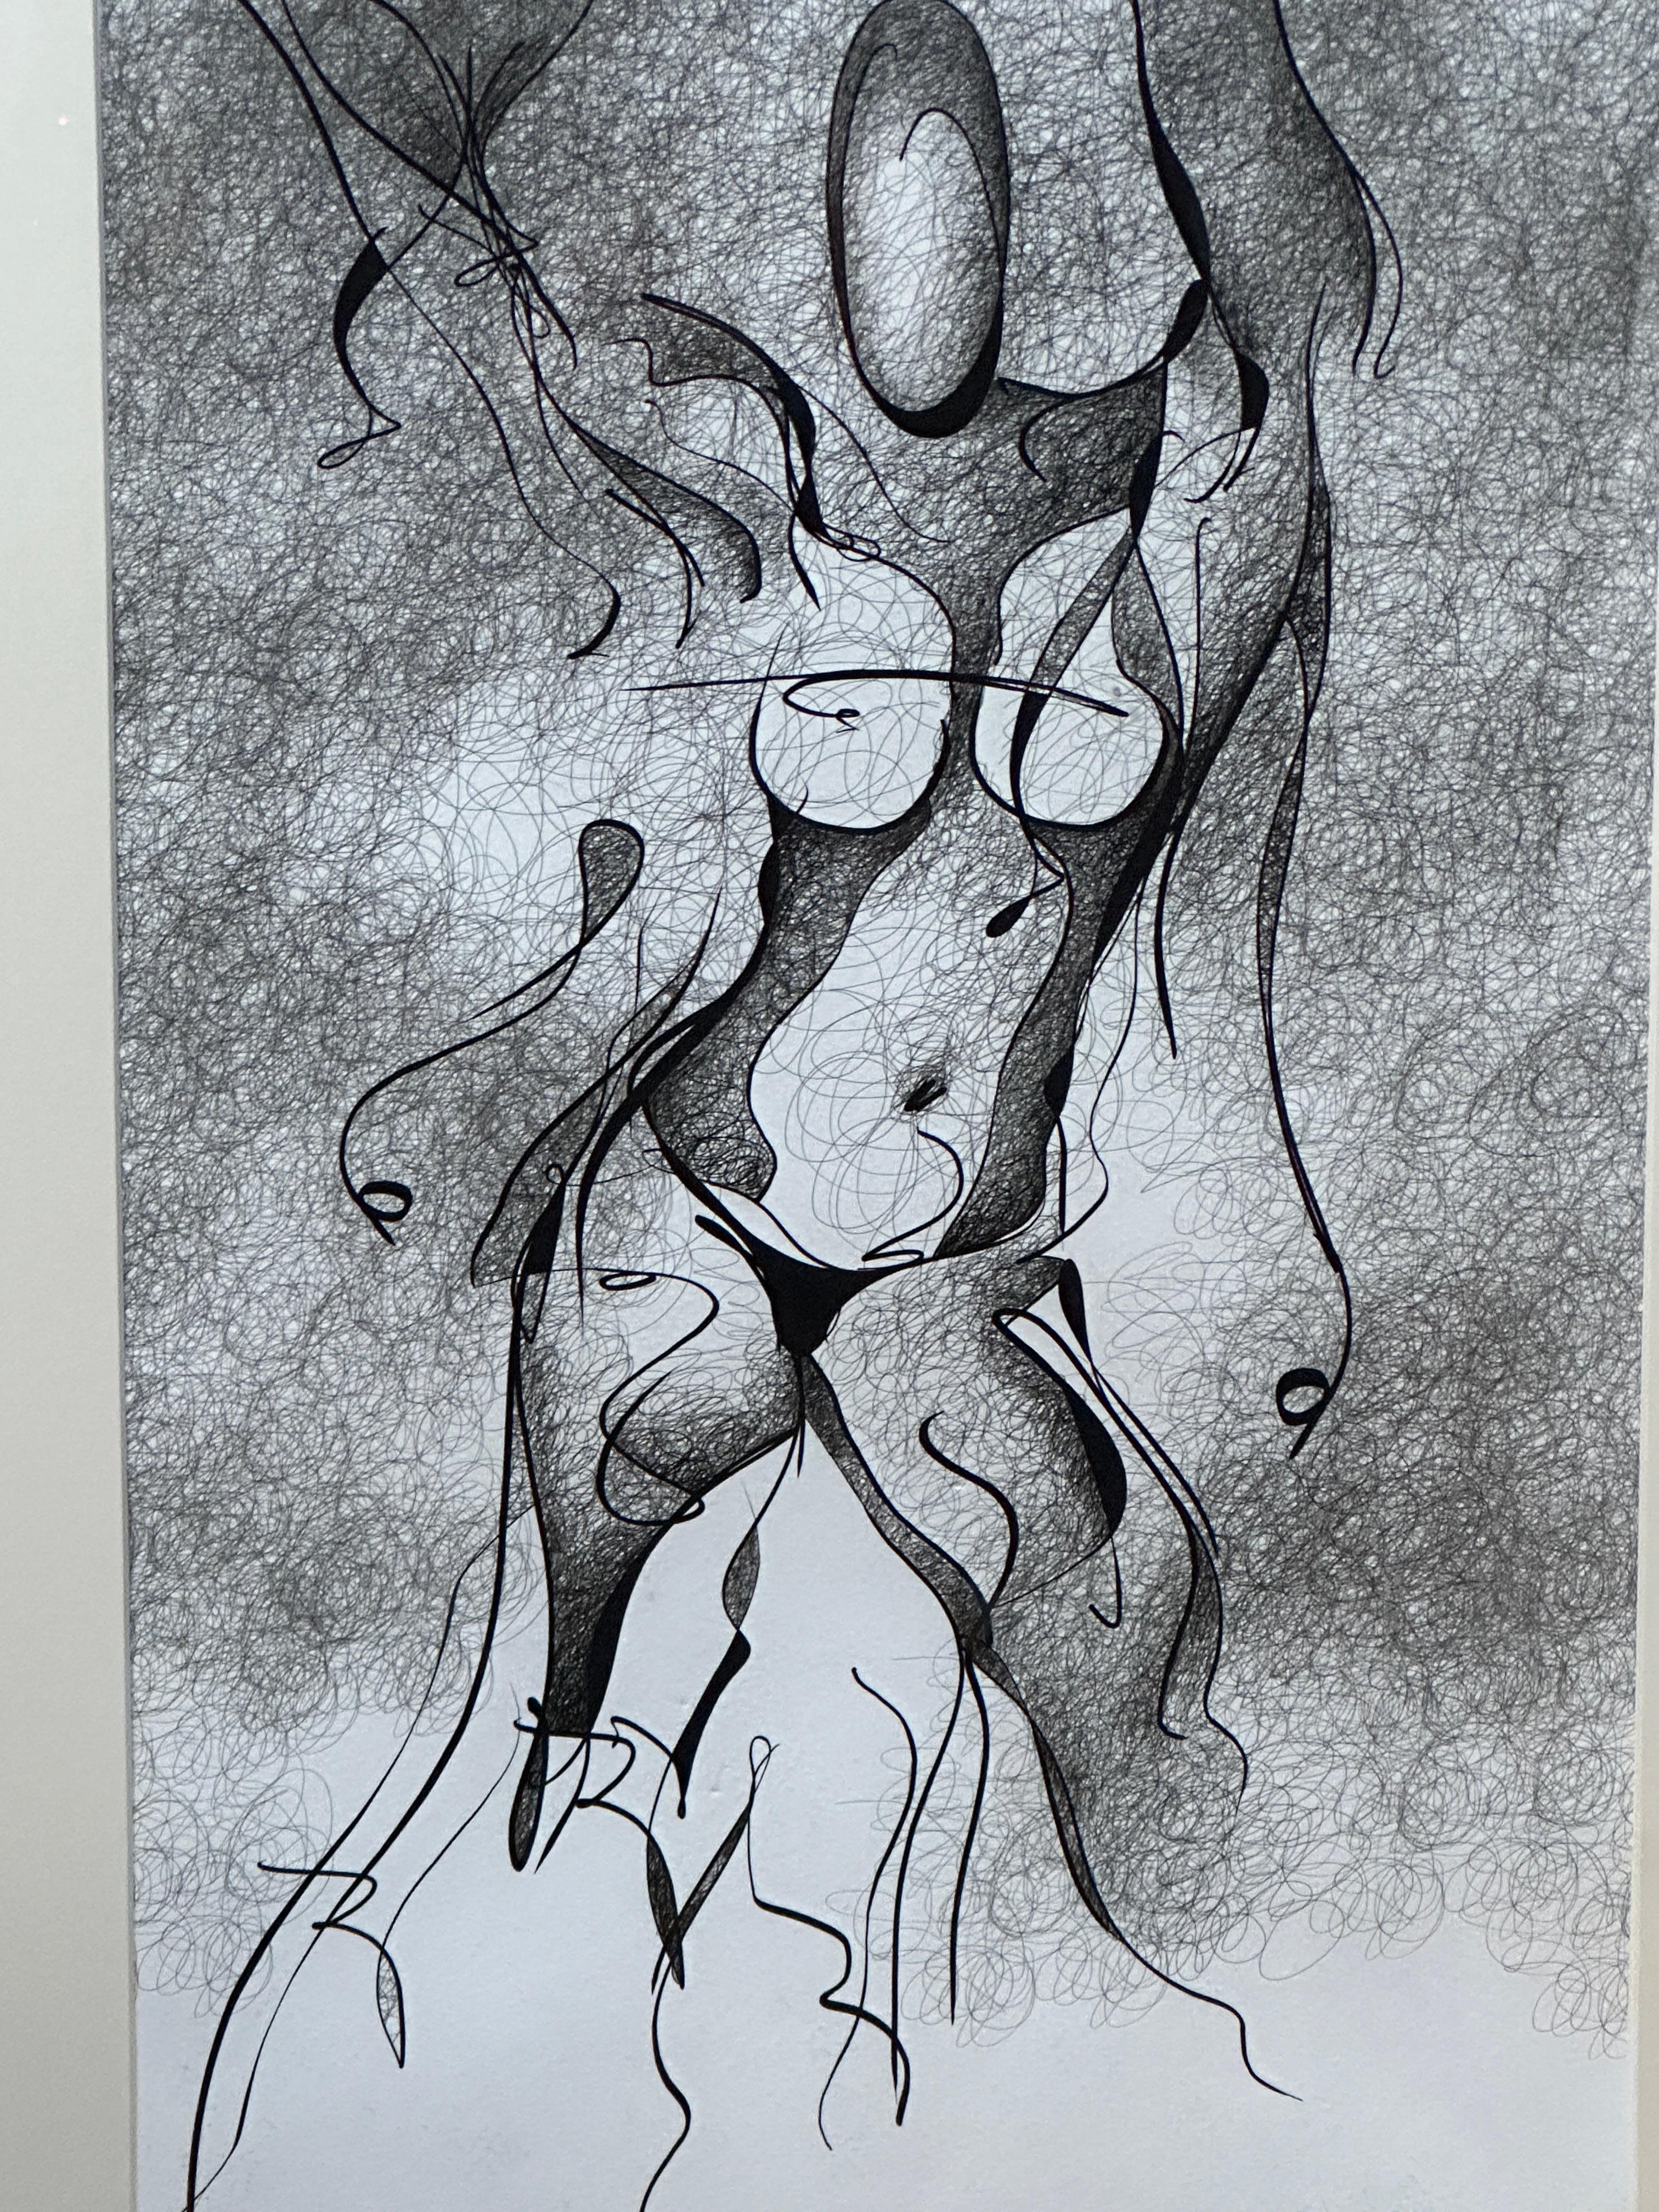 In this lithograph of a nude woman, the essence of feminine mysticism takes center stage. The work is numbered and signed but with a signature that makes it difficult to read the identity of the artist. We offer it framed. The original preparatory